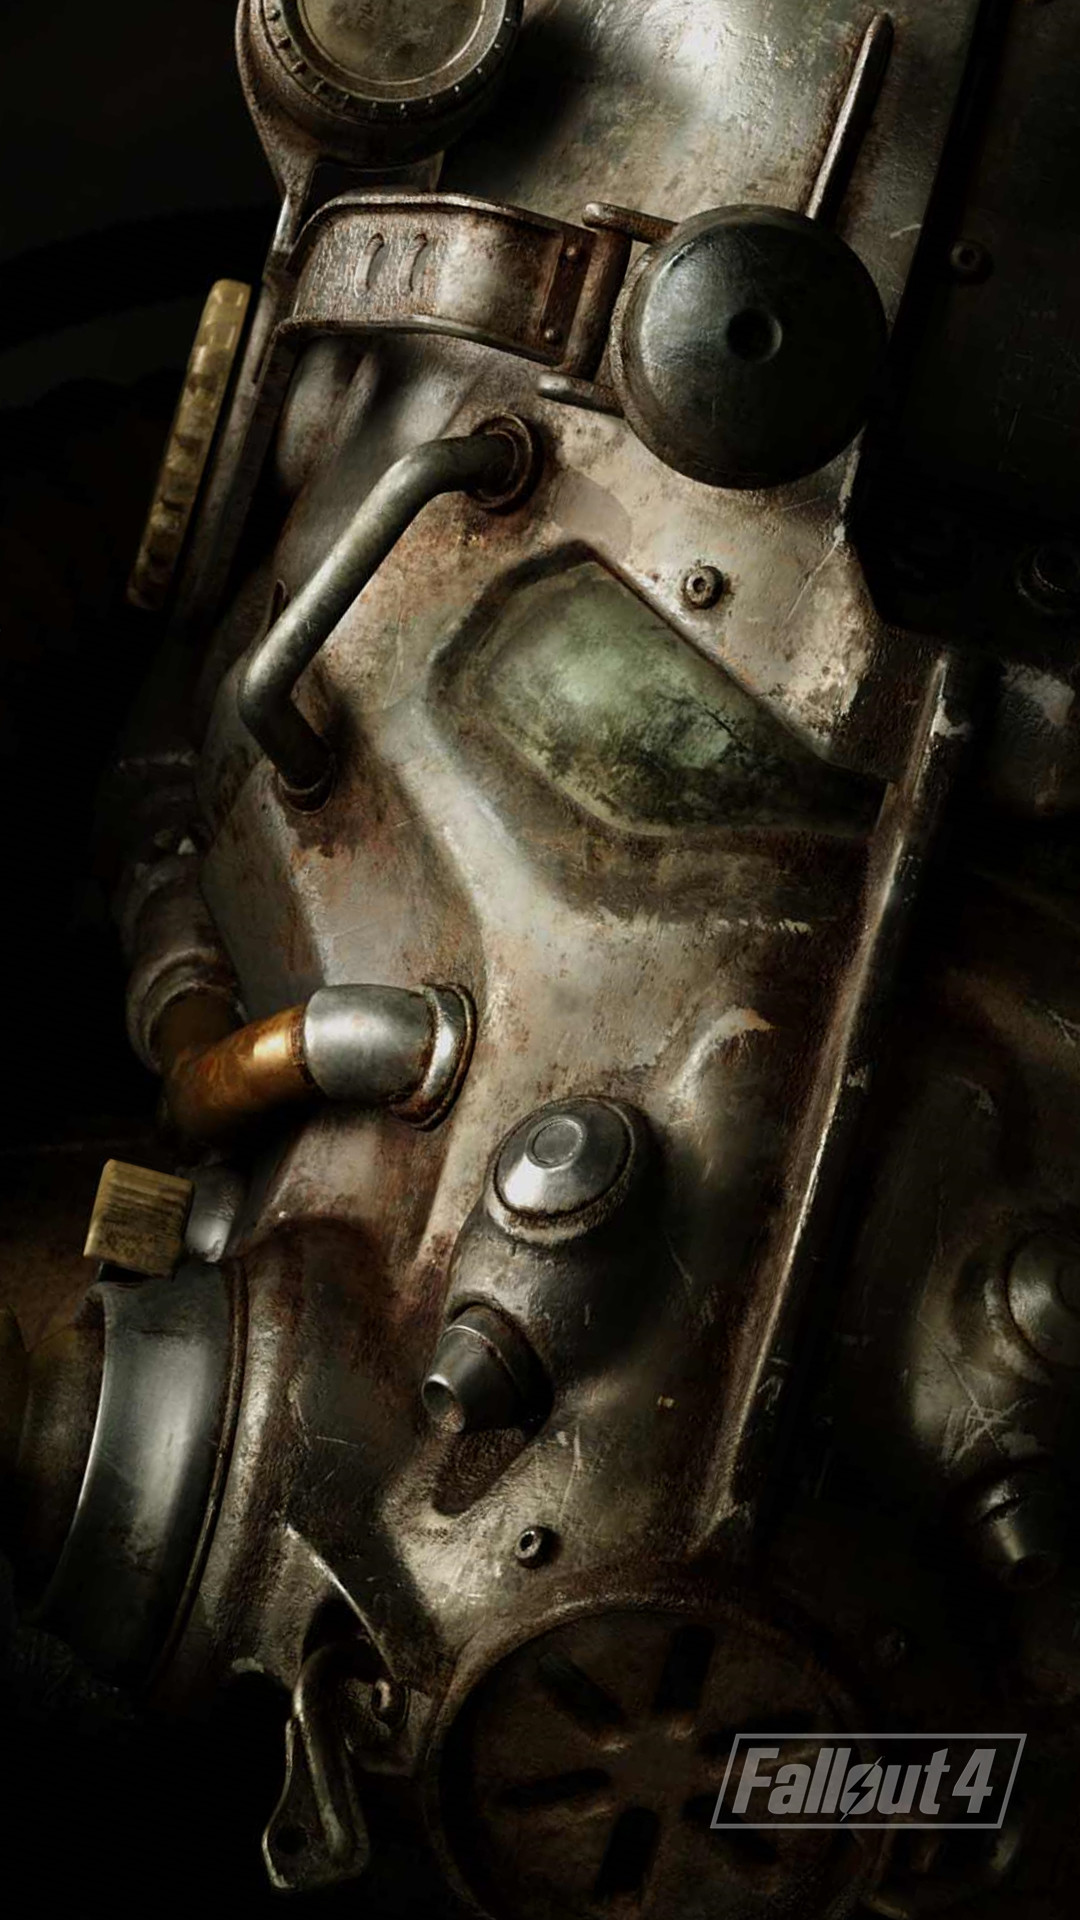 1080x1920 fallout 4 wallpaper for iphone 6